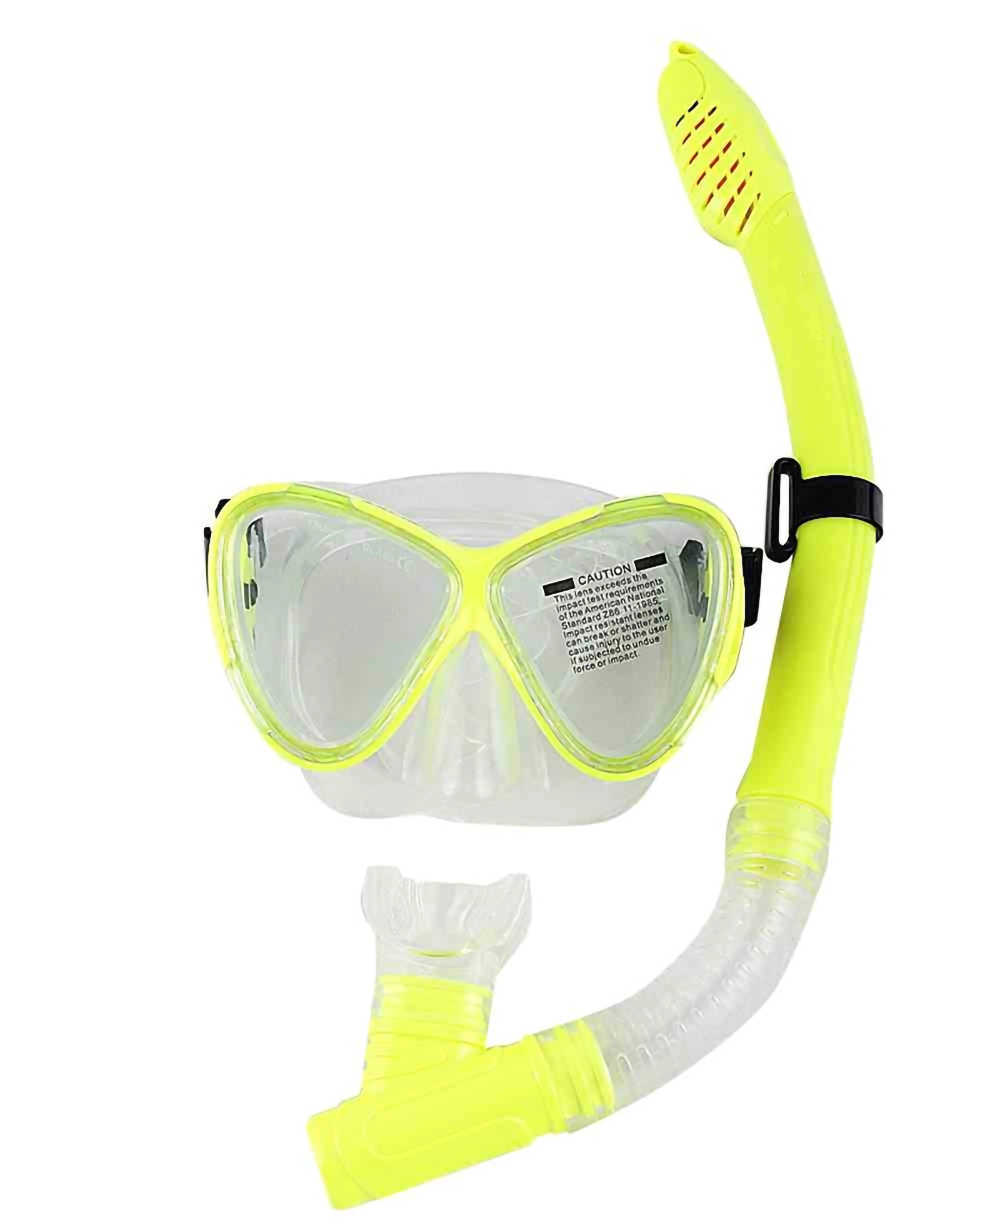 Tempered Glass Lens Anti Leak Anti Fog 180° Wide View Scuba Swimming Snorkeling Diving Mask Goggles With Snorkel Set Gear